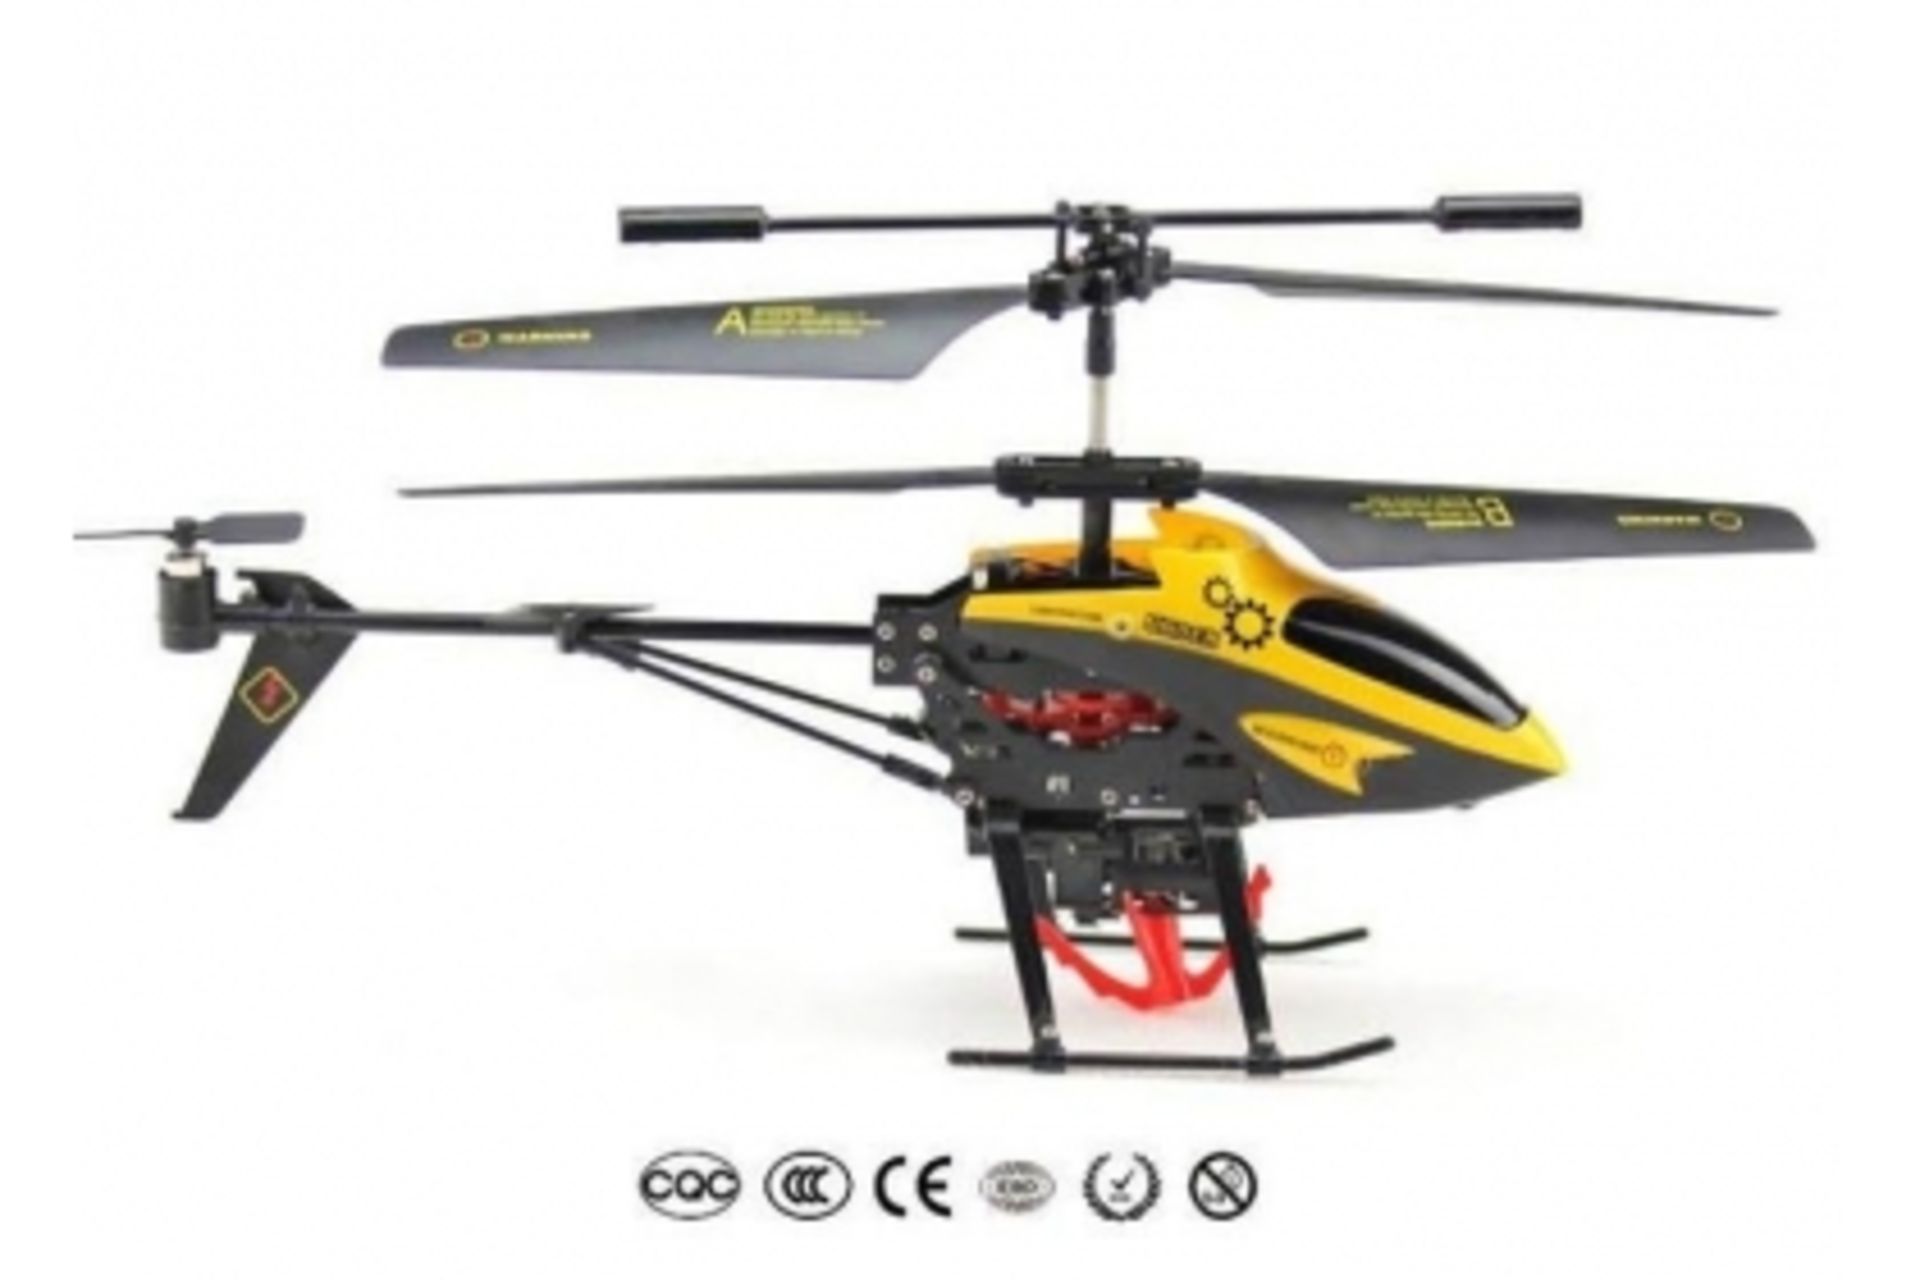 V Infrared controlled Cargo Helicopter RRP £79.99 With 3-channel gyro and trim active technology. - Image 4 of 6